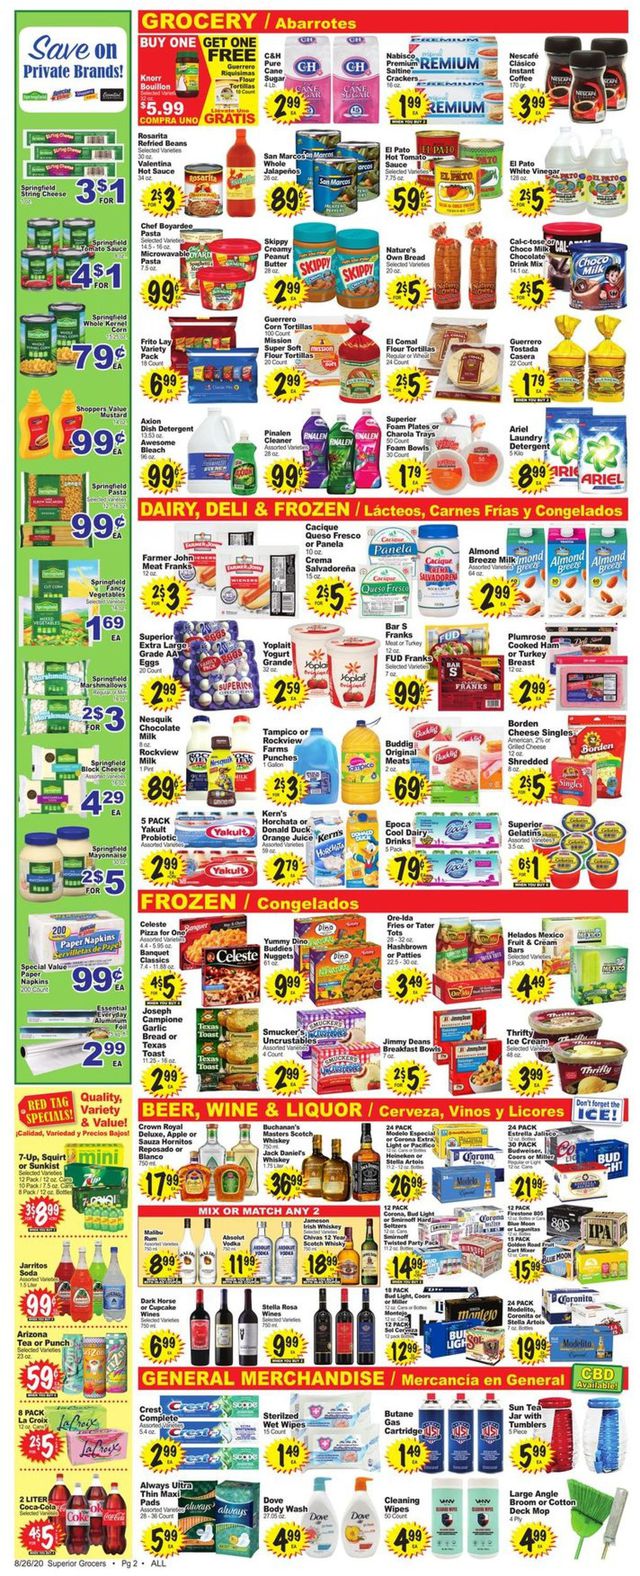 Superior Grocers Ad from 08/26/2020